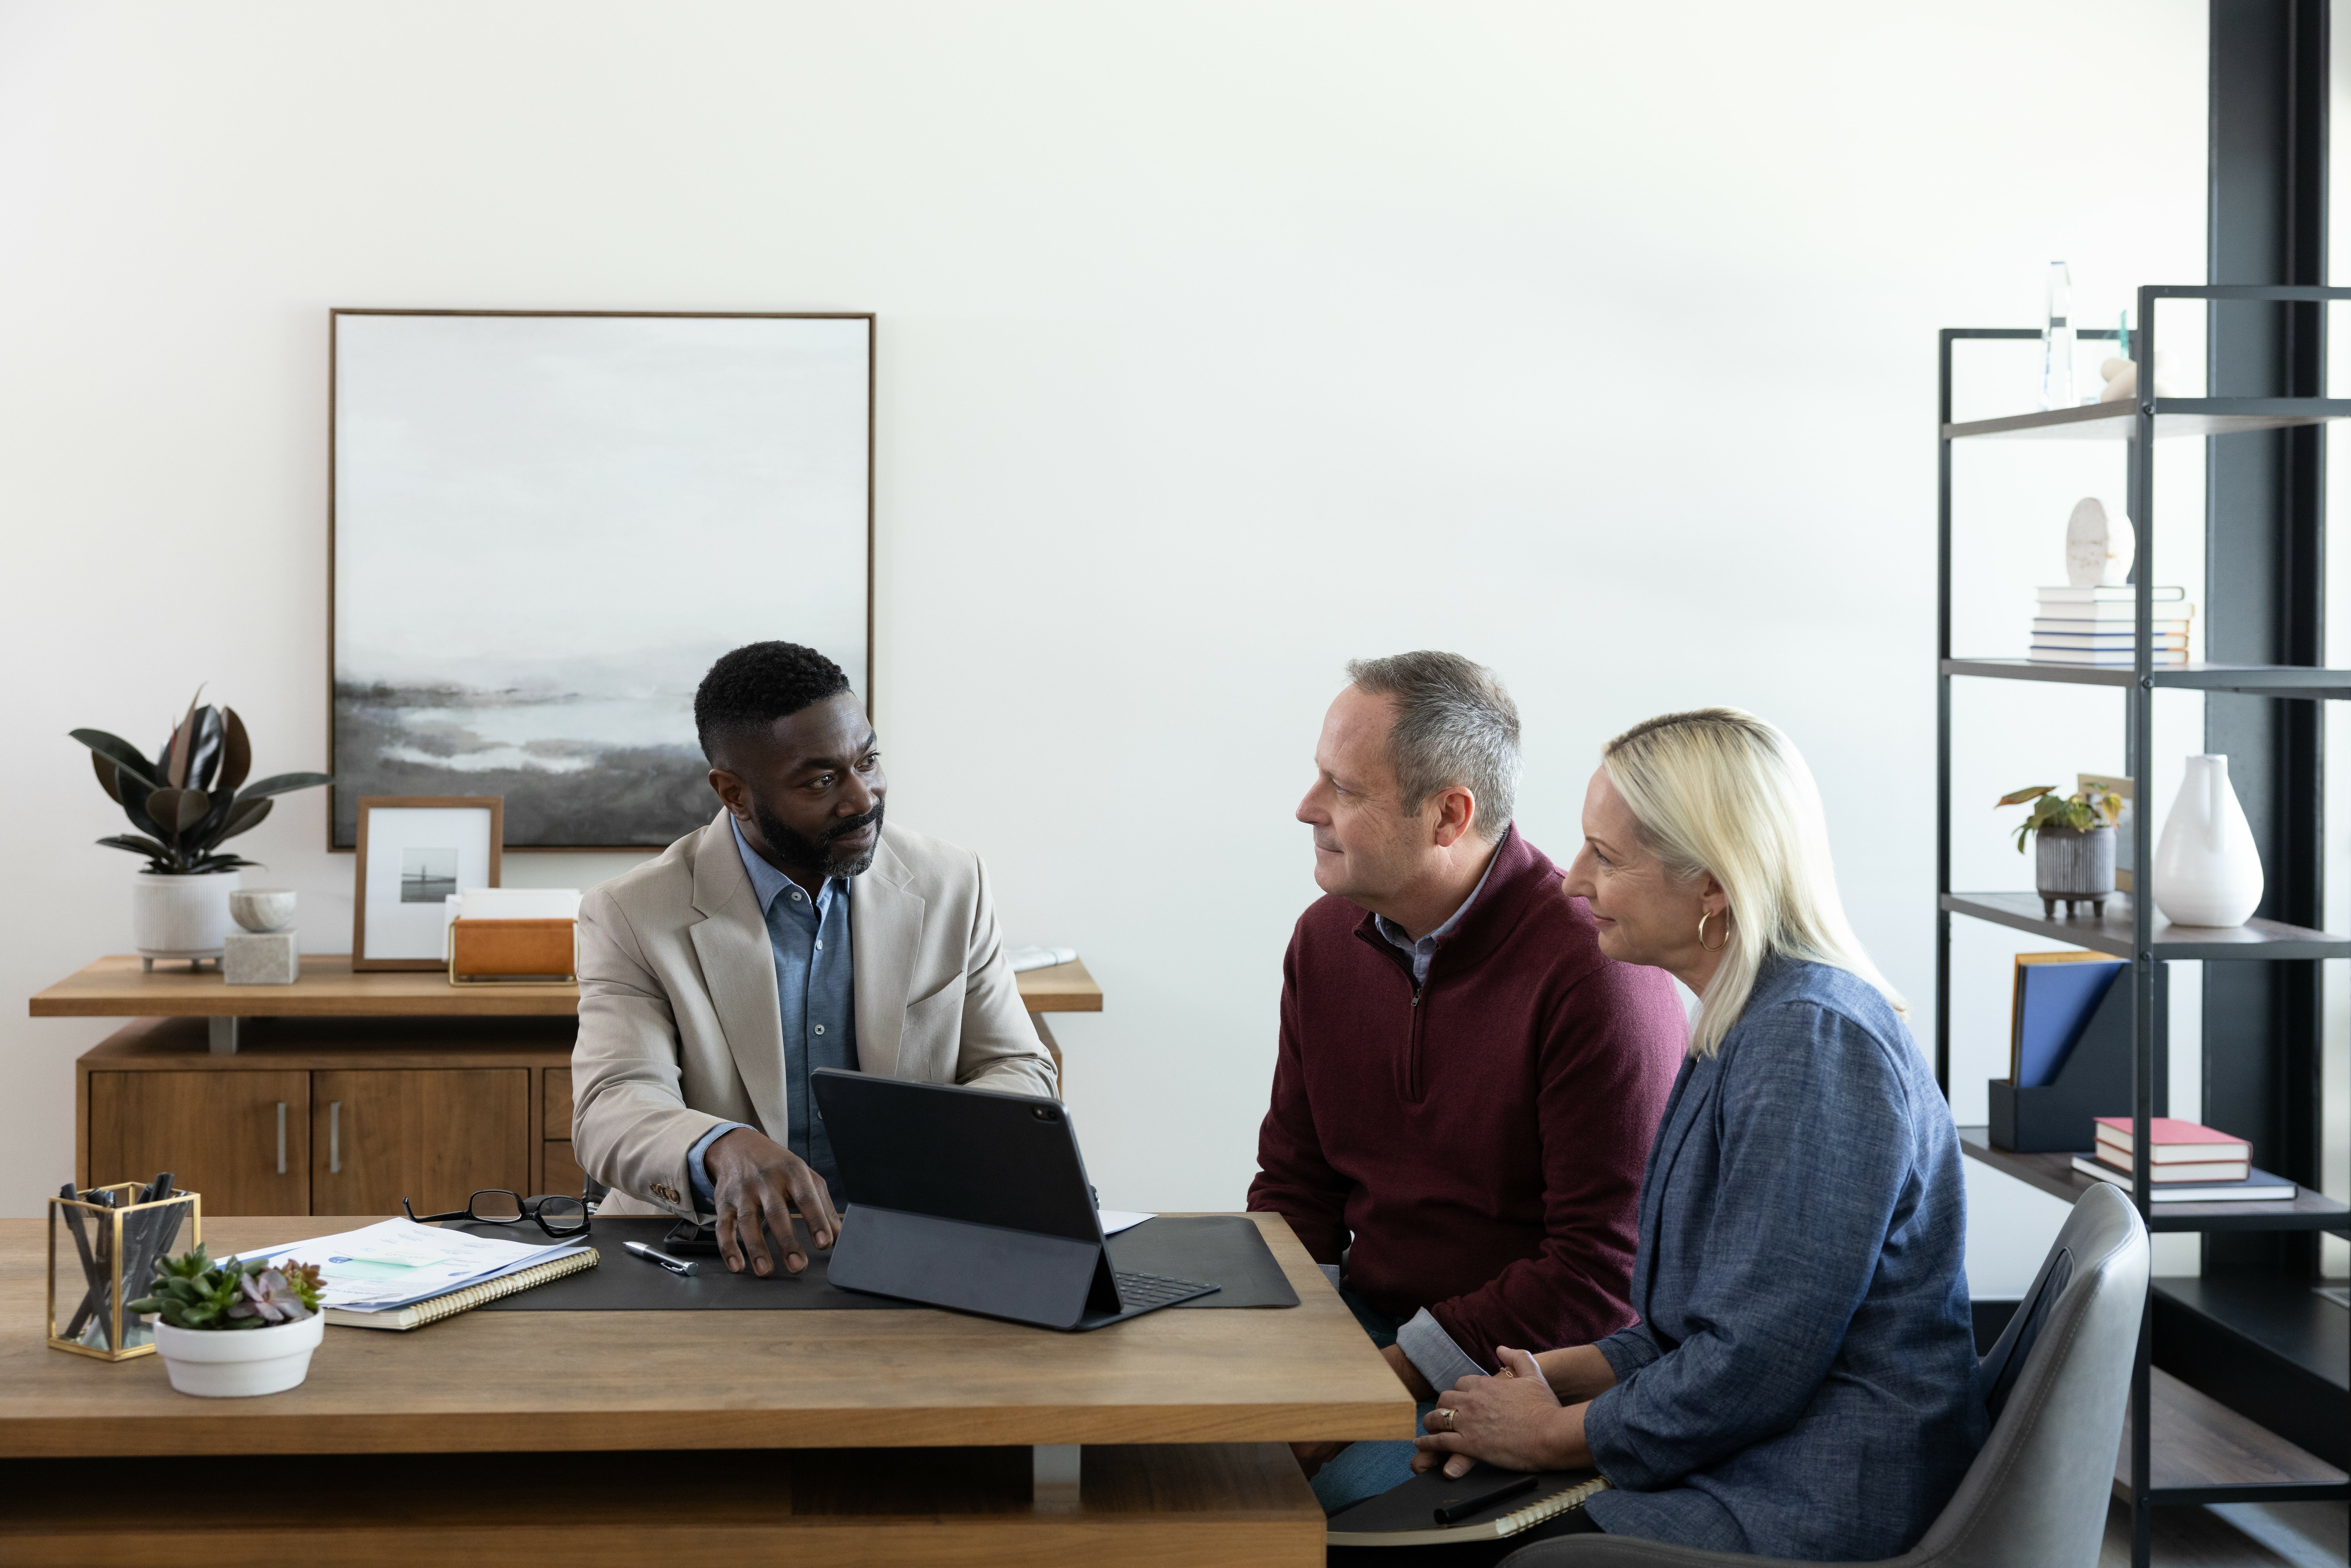 A couple speaking to a man presenting on a tablet in an office.